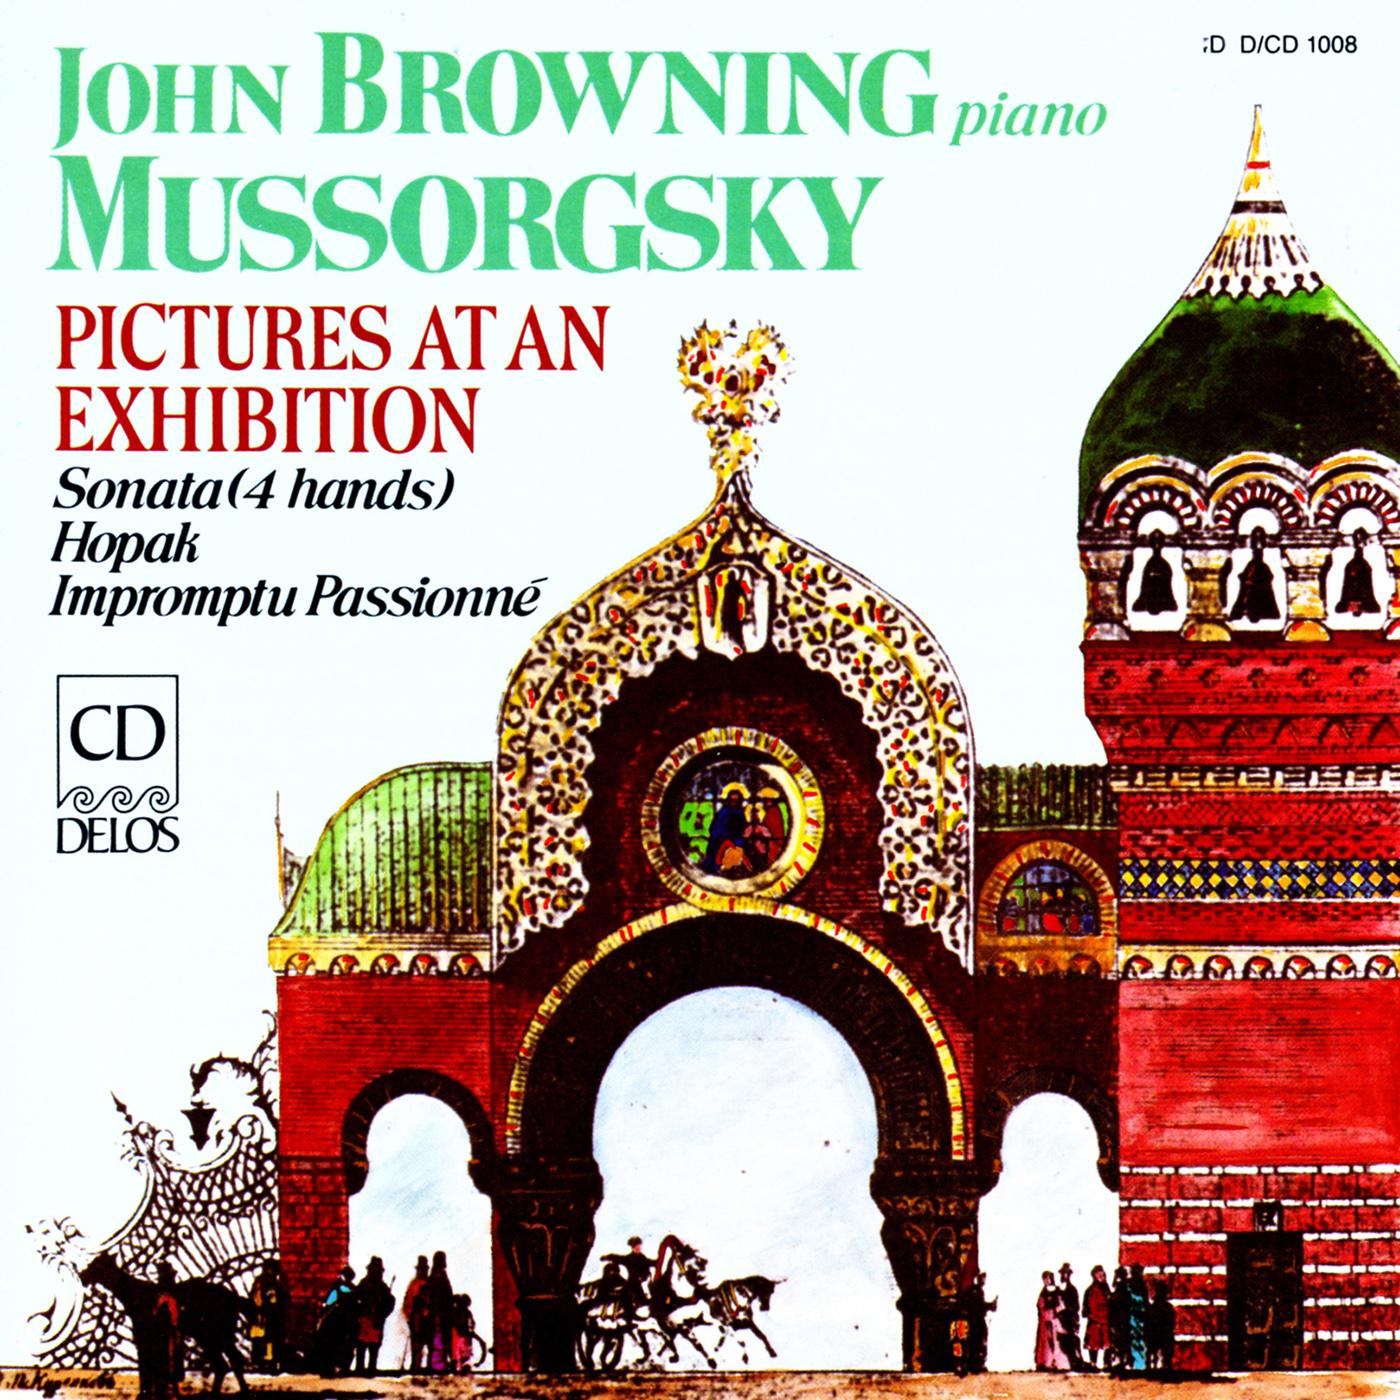 MUSSORGSKY, M.: Pictures at an Exhibition / Piano Sonata / Impromptu passionne (Browning, J.)